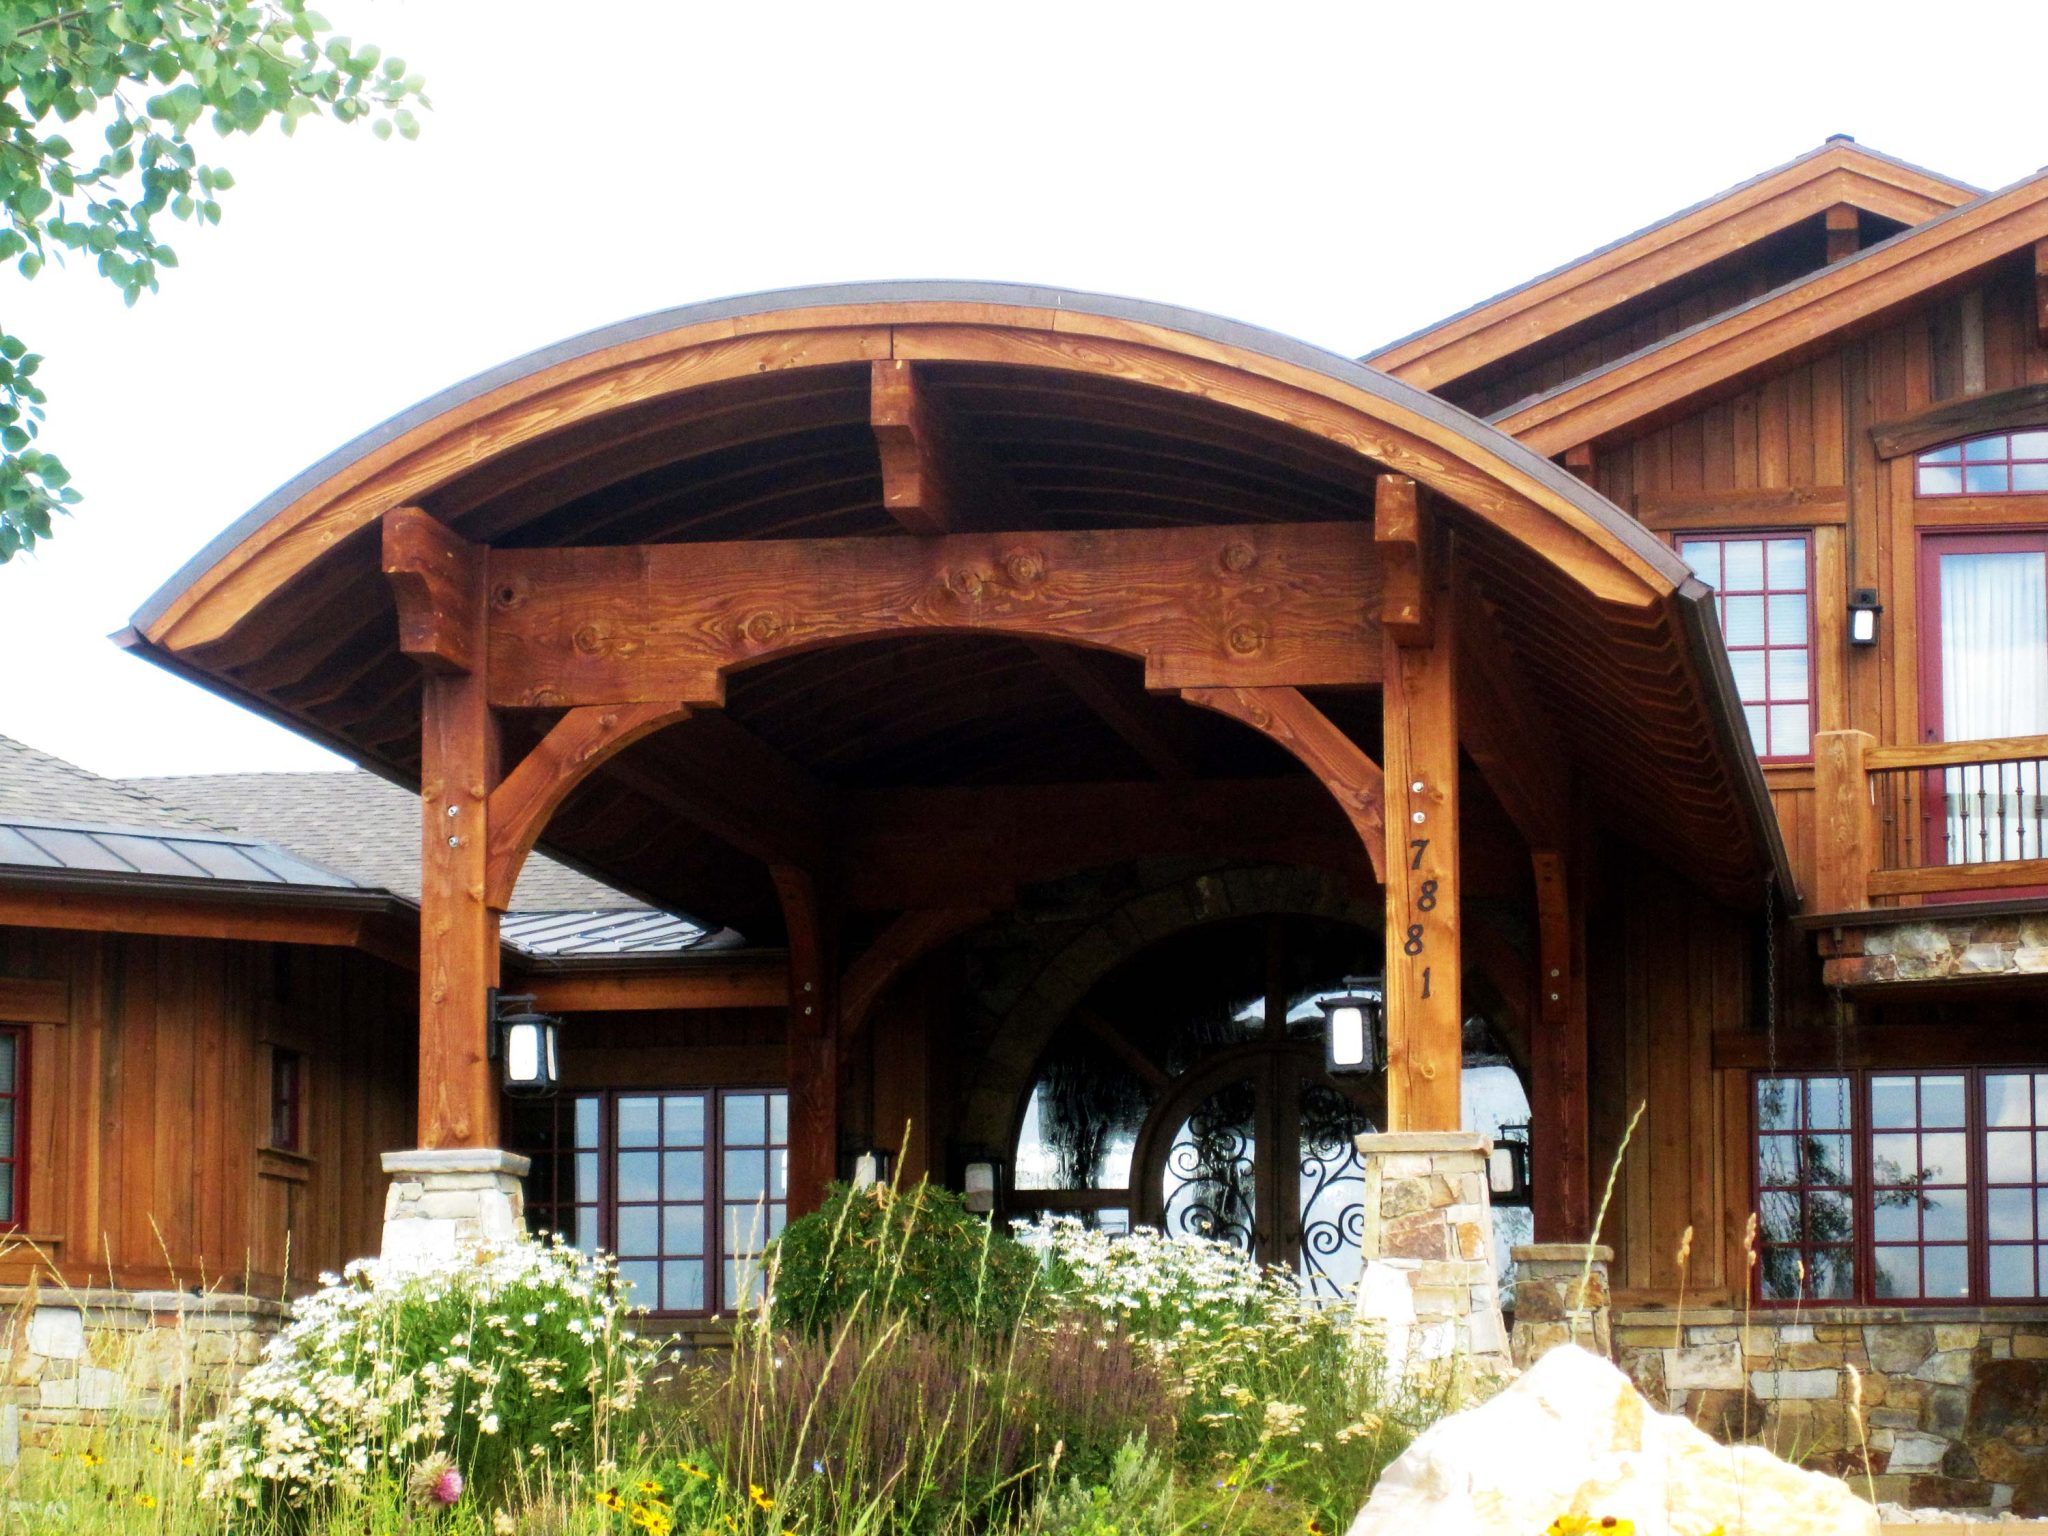 entry-arched-pavilion-timber